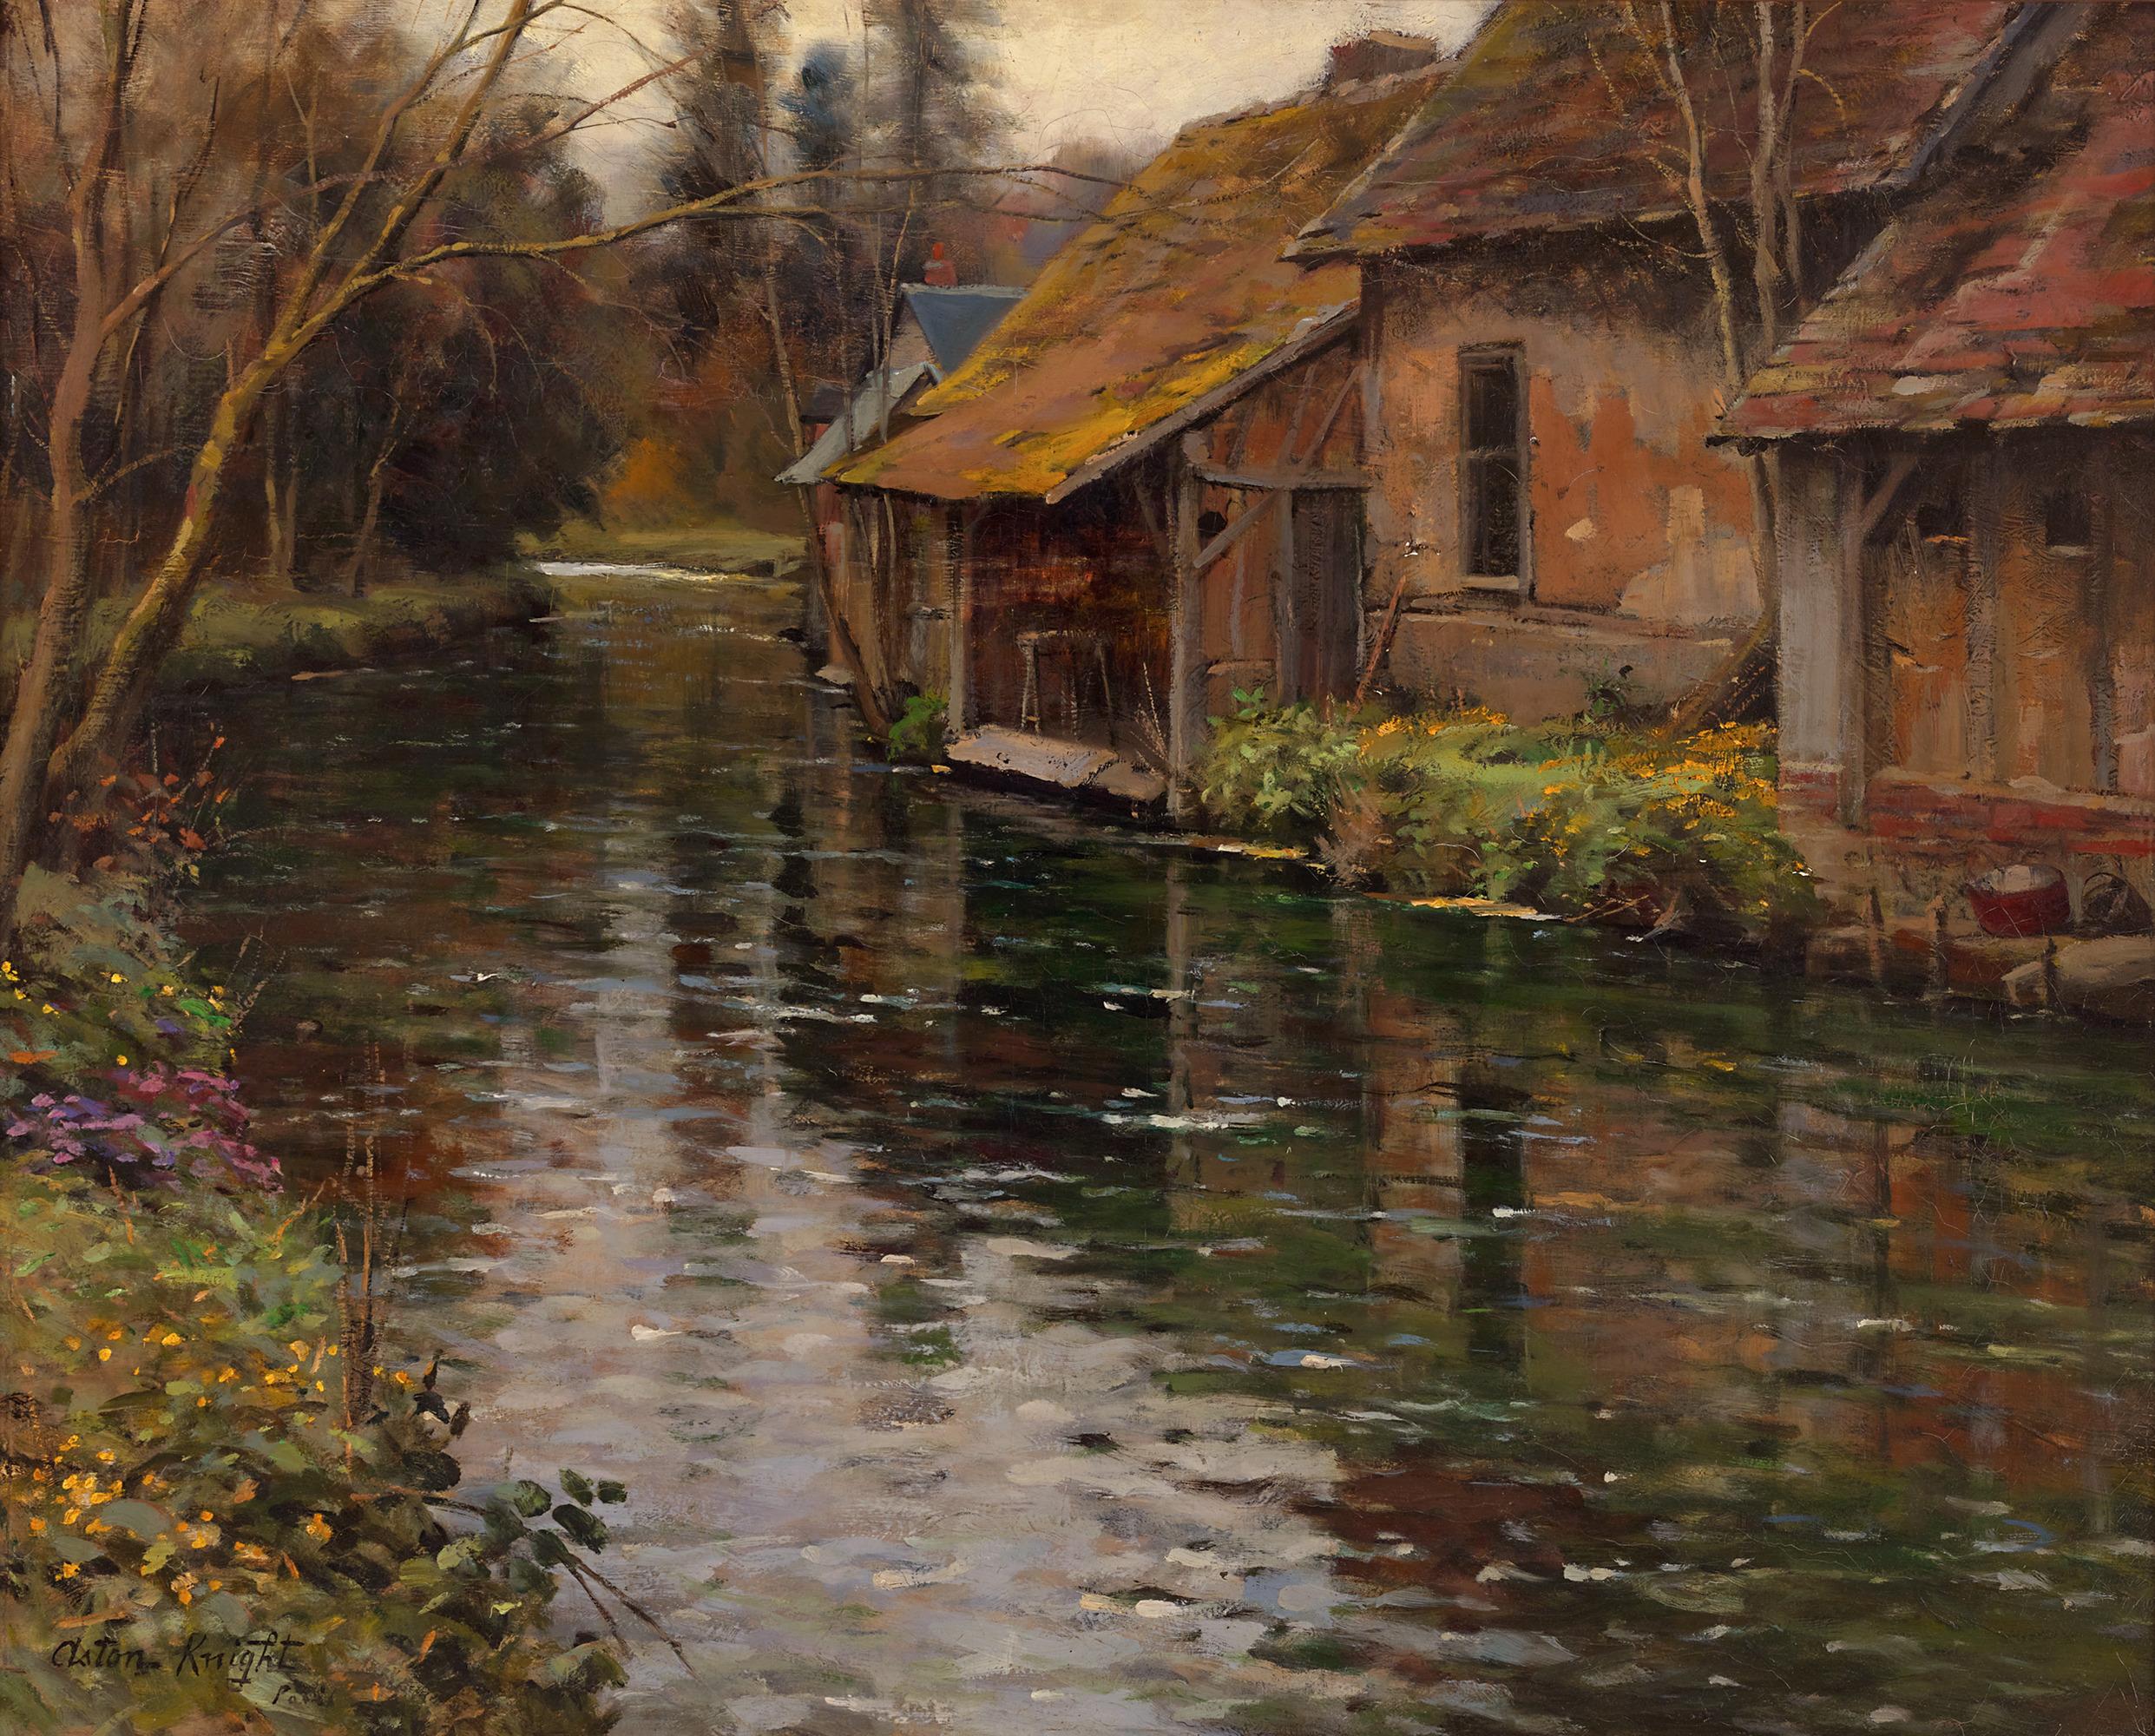 Louis Aston Knight  1873-1948  American 

Springtime

Signed "Aston Knight / Paris" (lower left)
Oil on canvas

A quintessential landscape scene by Parisian-born American artist Louis Aston Knight, this compelling composition demonstrates the